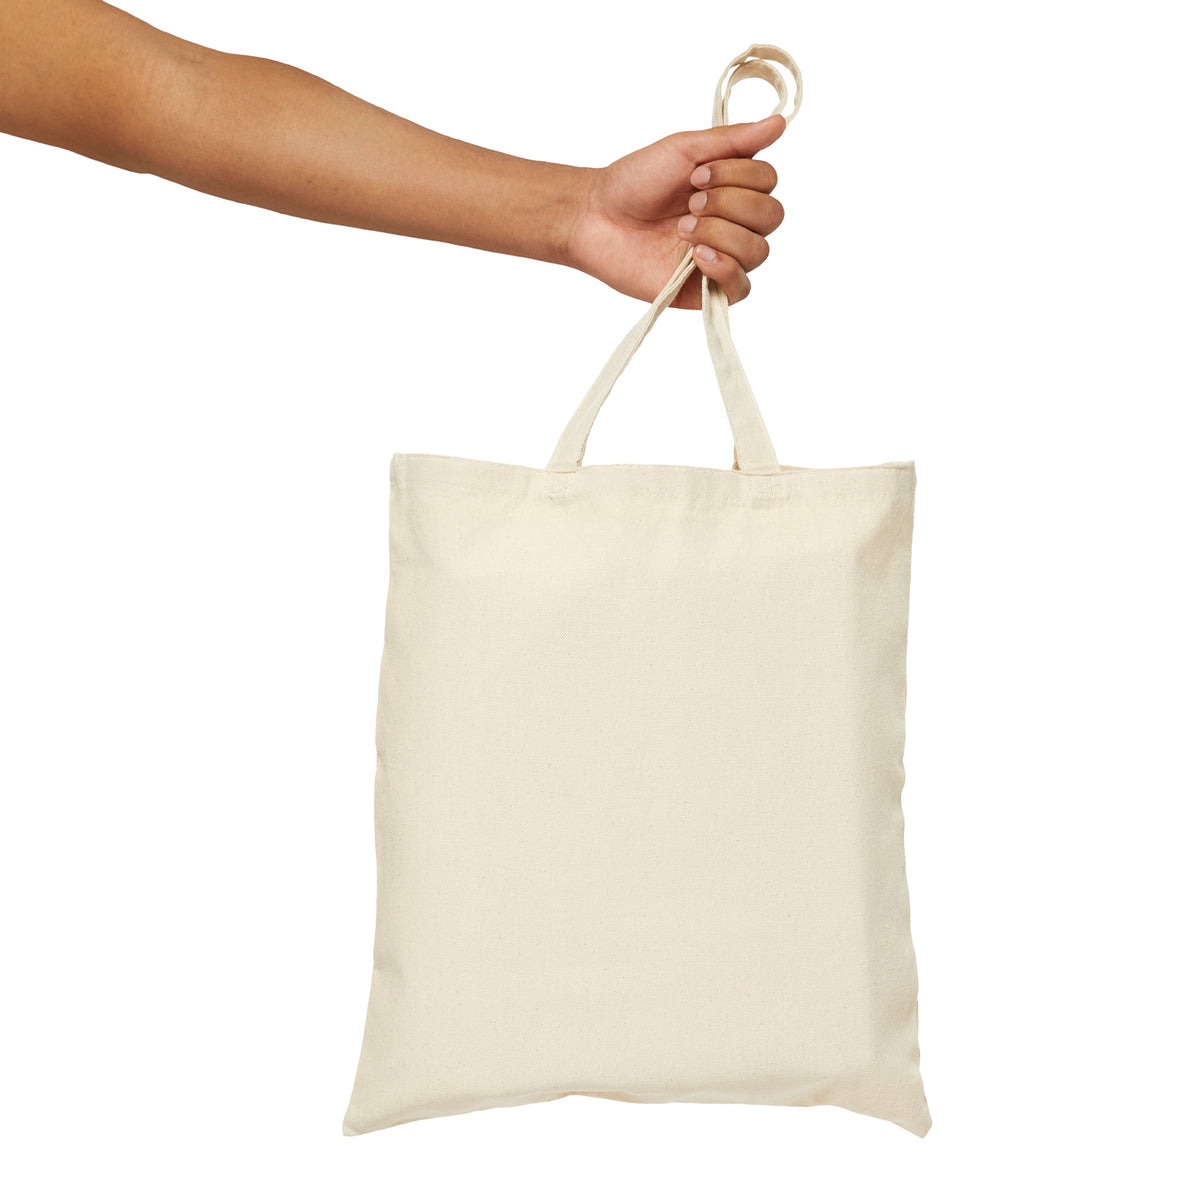 Pilates Vibes Canvas Tote